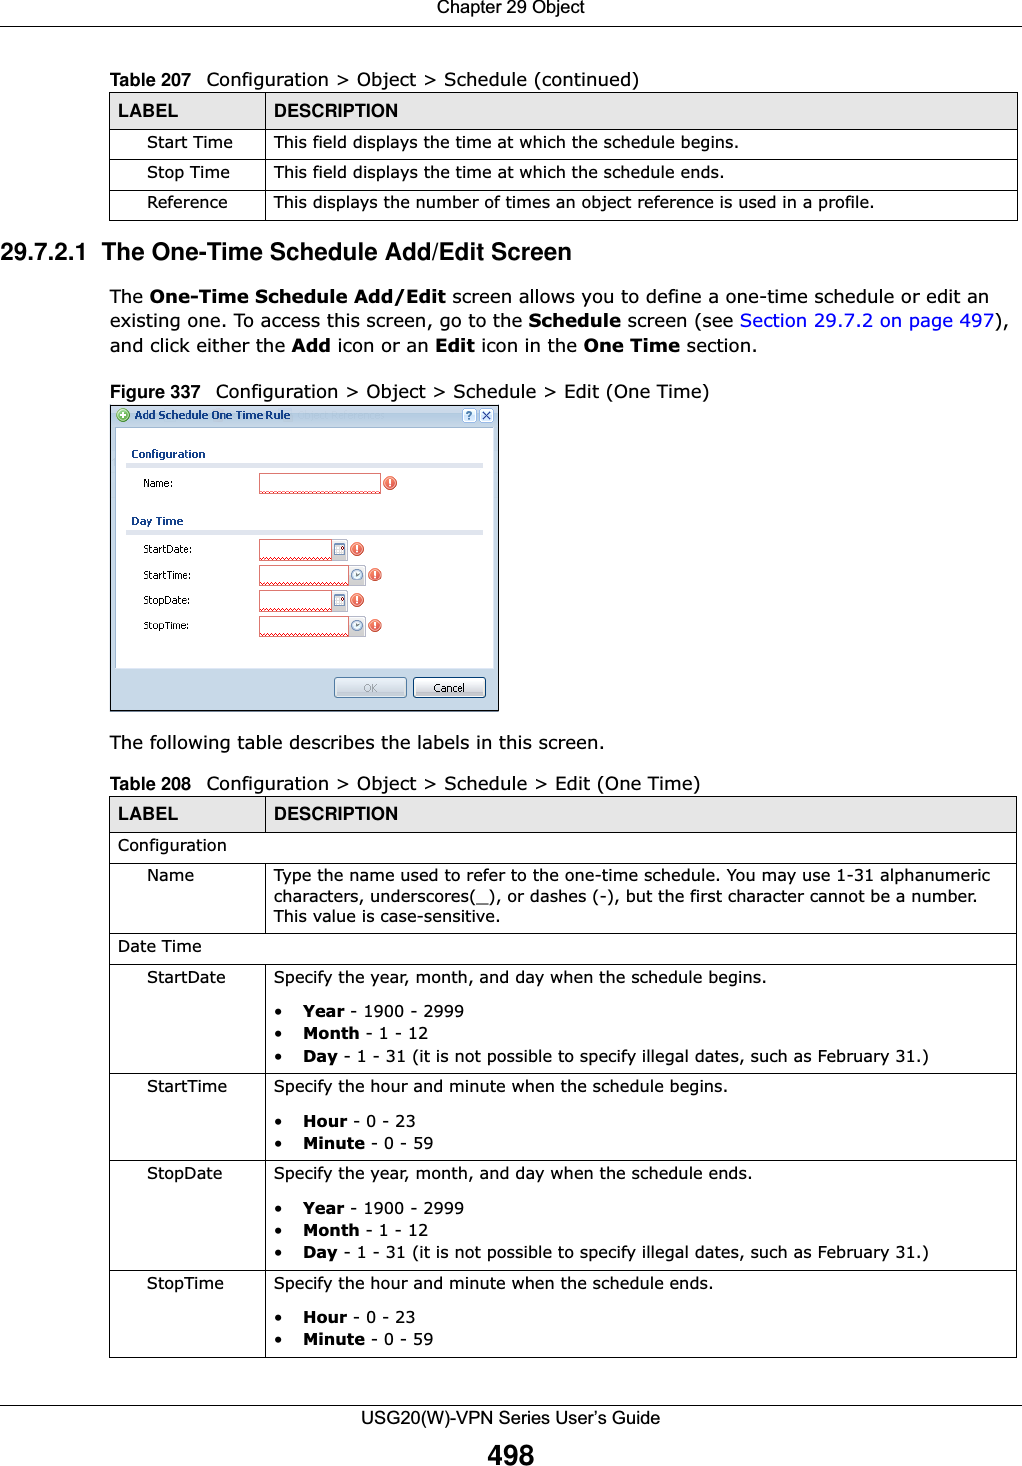 Chapter 29 ObjectUSG20(W)-VPN Series User’s Guide49829.7.2.1  The One-Time Schedule Add/Edit ScreenThe One-Time Schedule Add/Edit screen allows you to define a one-time schedule or edit an existing one. To access this screen, go to the Schedule screen (see Section 29.7.2 on page 497), and click either the Add icon or an Edit icon in the One Time section.Figure 337   Configuration &gt; Object &gt; Schedule &gt; Edit (One Time)The following table describes the labels in this screen. Start Time This field displays the time at which the schedule begins.Stop Time This field displays the time at which the schedule ends.Reference This displays the number of times an object reference is used in a profile.Table 207   Configuration &gt; Object &gt; Schedule (continued)LABEL DESCRIPTIONTable 208   Configuration &gt; Object &gt; Schedule &gt; Edit (One Time)LABEL DESCRIPTIONConfigurationName Type the name used to refer to the one-time schedule. You may use 1-31 alphanumeric characters, underscores(_), or dashes (-), but the first character cannot be a number. This value is case-sensitive.Date TimeStartDate Specify the year, month, and day when the schedule begins.•Year - 1900 - 2999•Month - 1 - 12•Day - 1 - 31 (it is not possible to specify illegal dates, such as February 31.)StartTime Specify the hour and minute when the schedule begins.•Hour - 0 - 23•Minute - 0 - 59StopDate Specify the year, month, and day when the schedule ends.•Year - 1900 - 2999•Month - 1 - 12•Day - 1 - 31 (it is not possible to specify illegal dates, such as February 31.)StopTime Specify the hour and minute when the schedule ends.•Hour - 0 - 23•Minute - 0 - 59